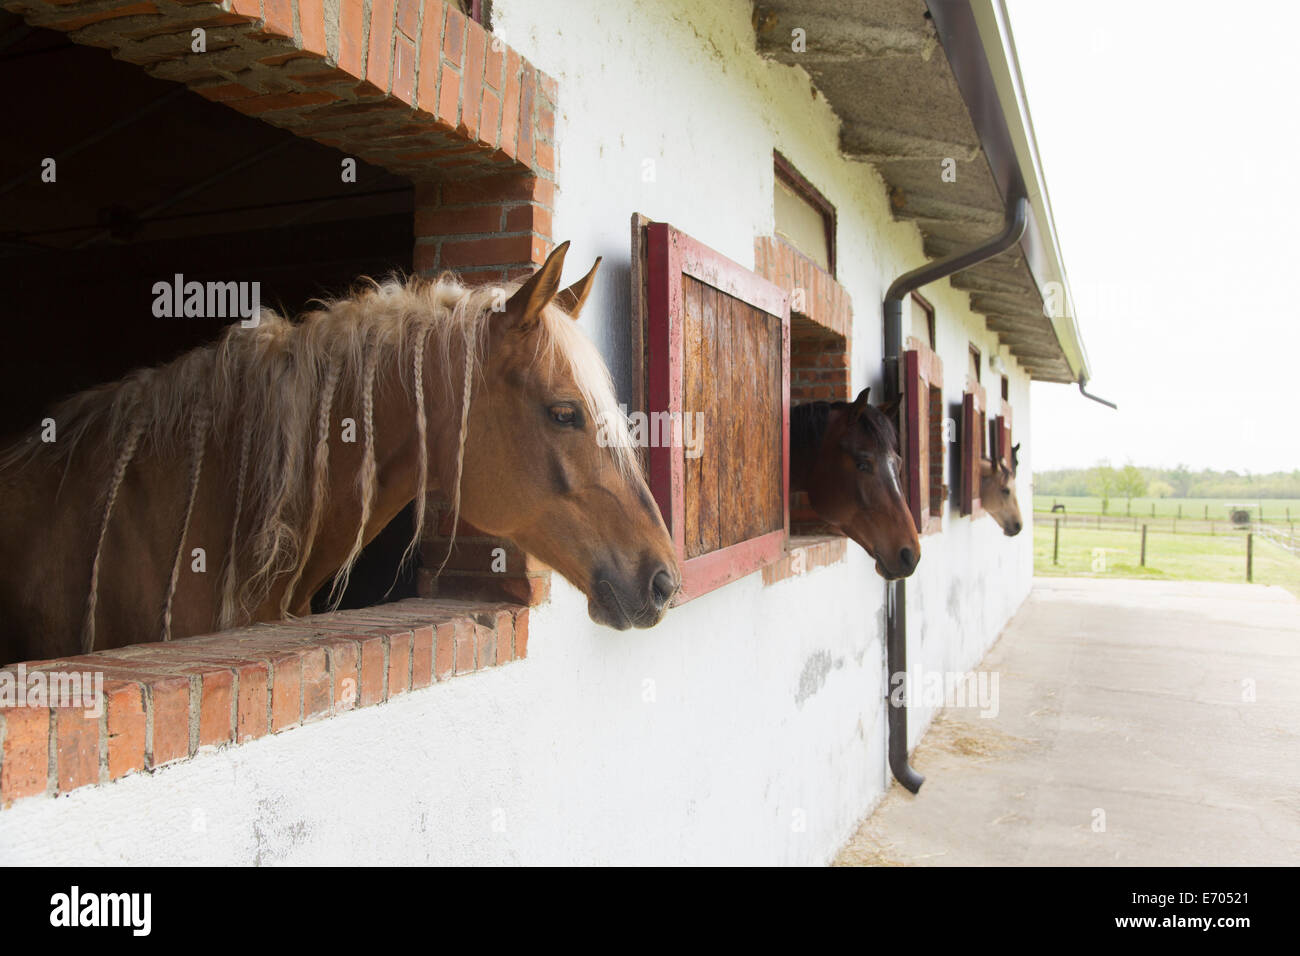 Horses in stable Stock Photo